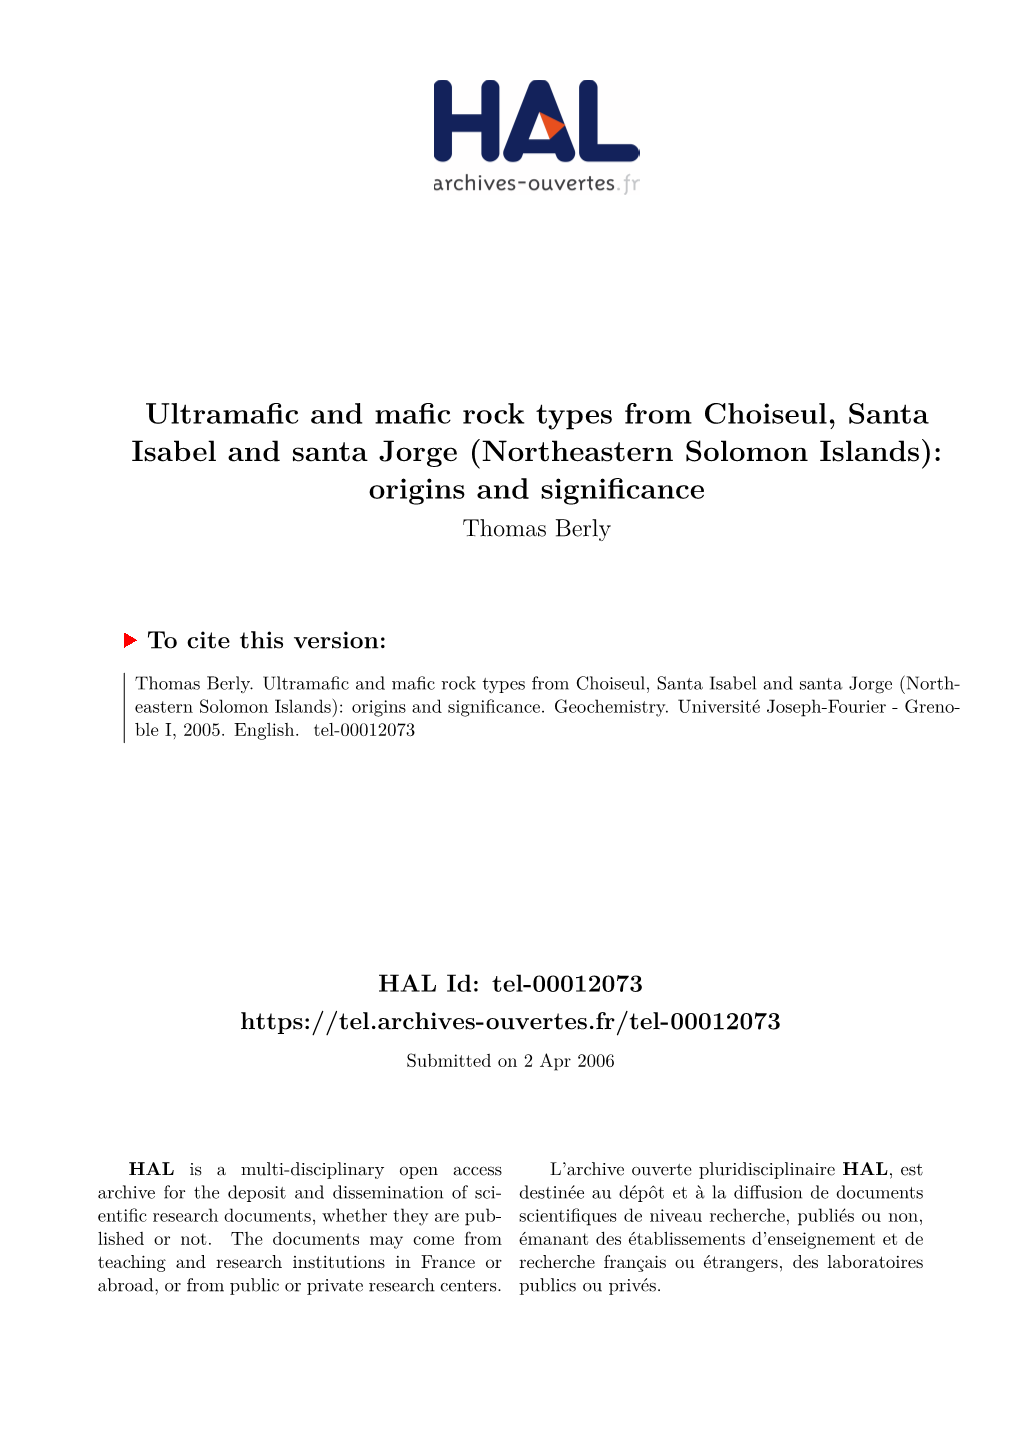 Ultramafic and Mafic Rock Types from Choiseul, Santa Isabel and Santa Jorge (Northeastern Solomon Islands): Origins and Significance Thomas Berly